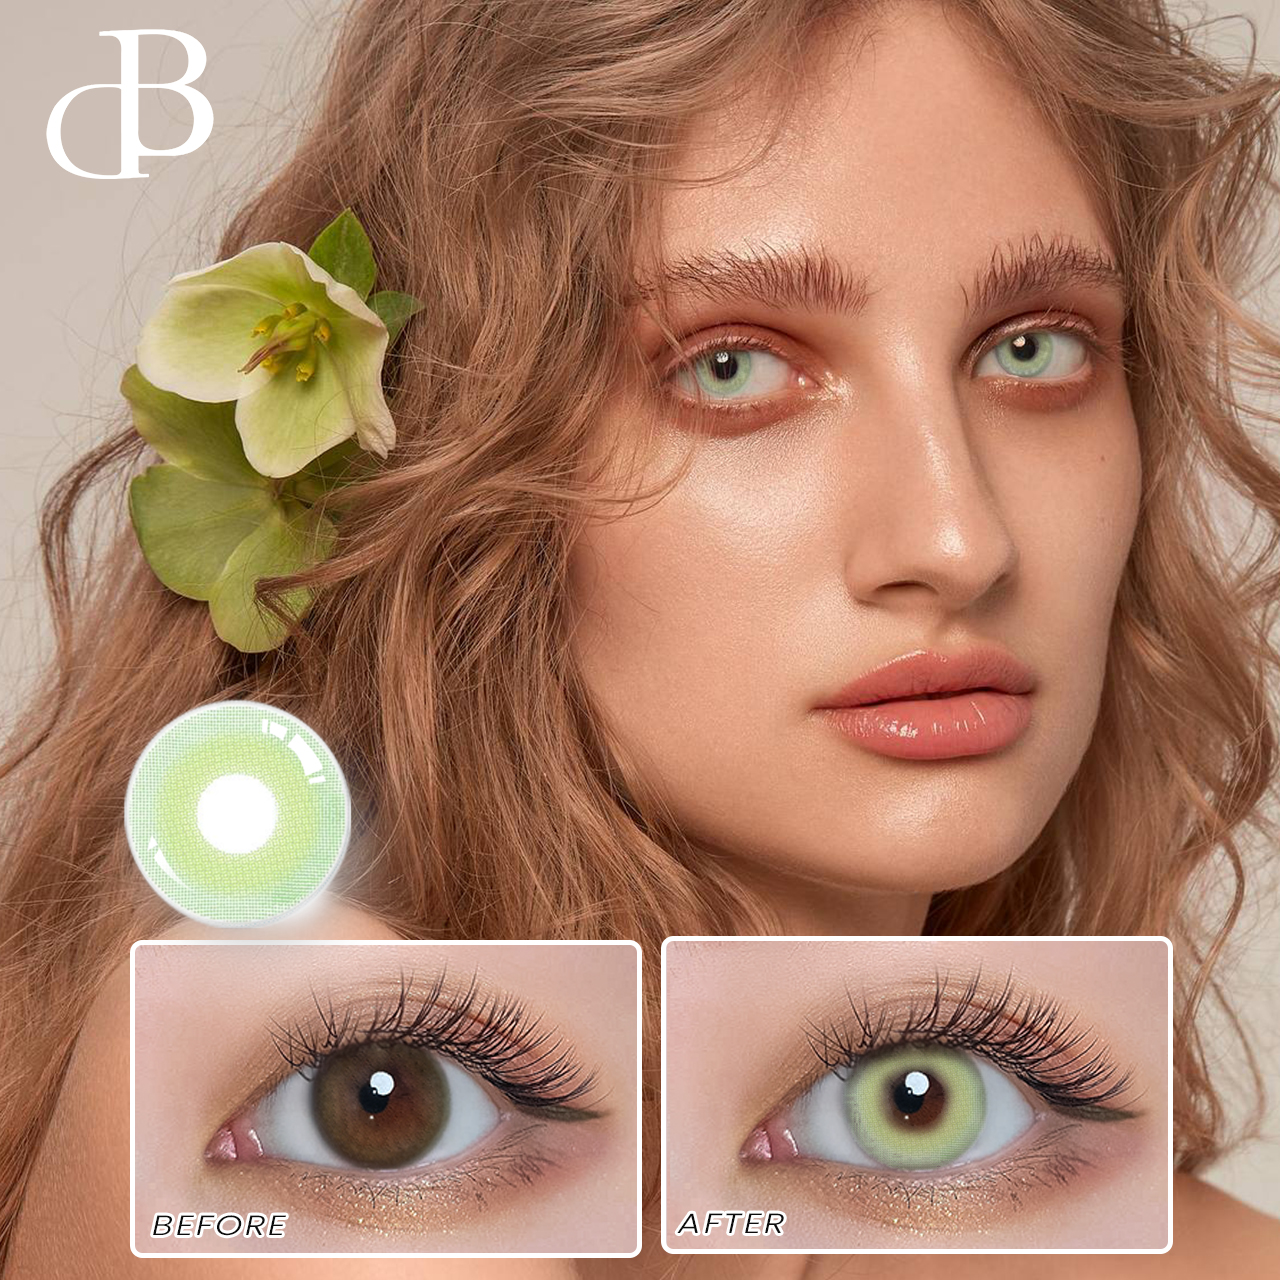 Free Shipping eyes Colored Lenses Contacts Eye Makeup Cosmetics Contacted Lens for Cosplay Beauty Color Contact Lenses